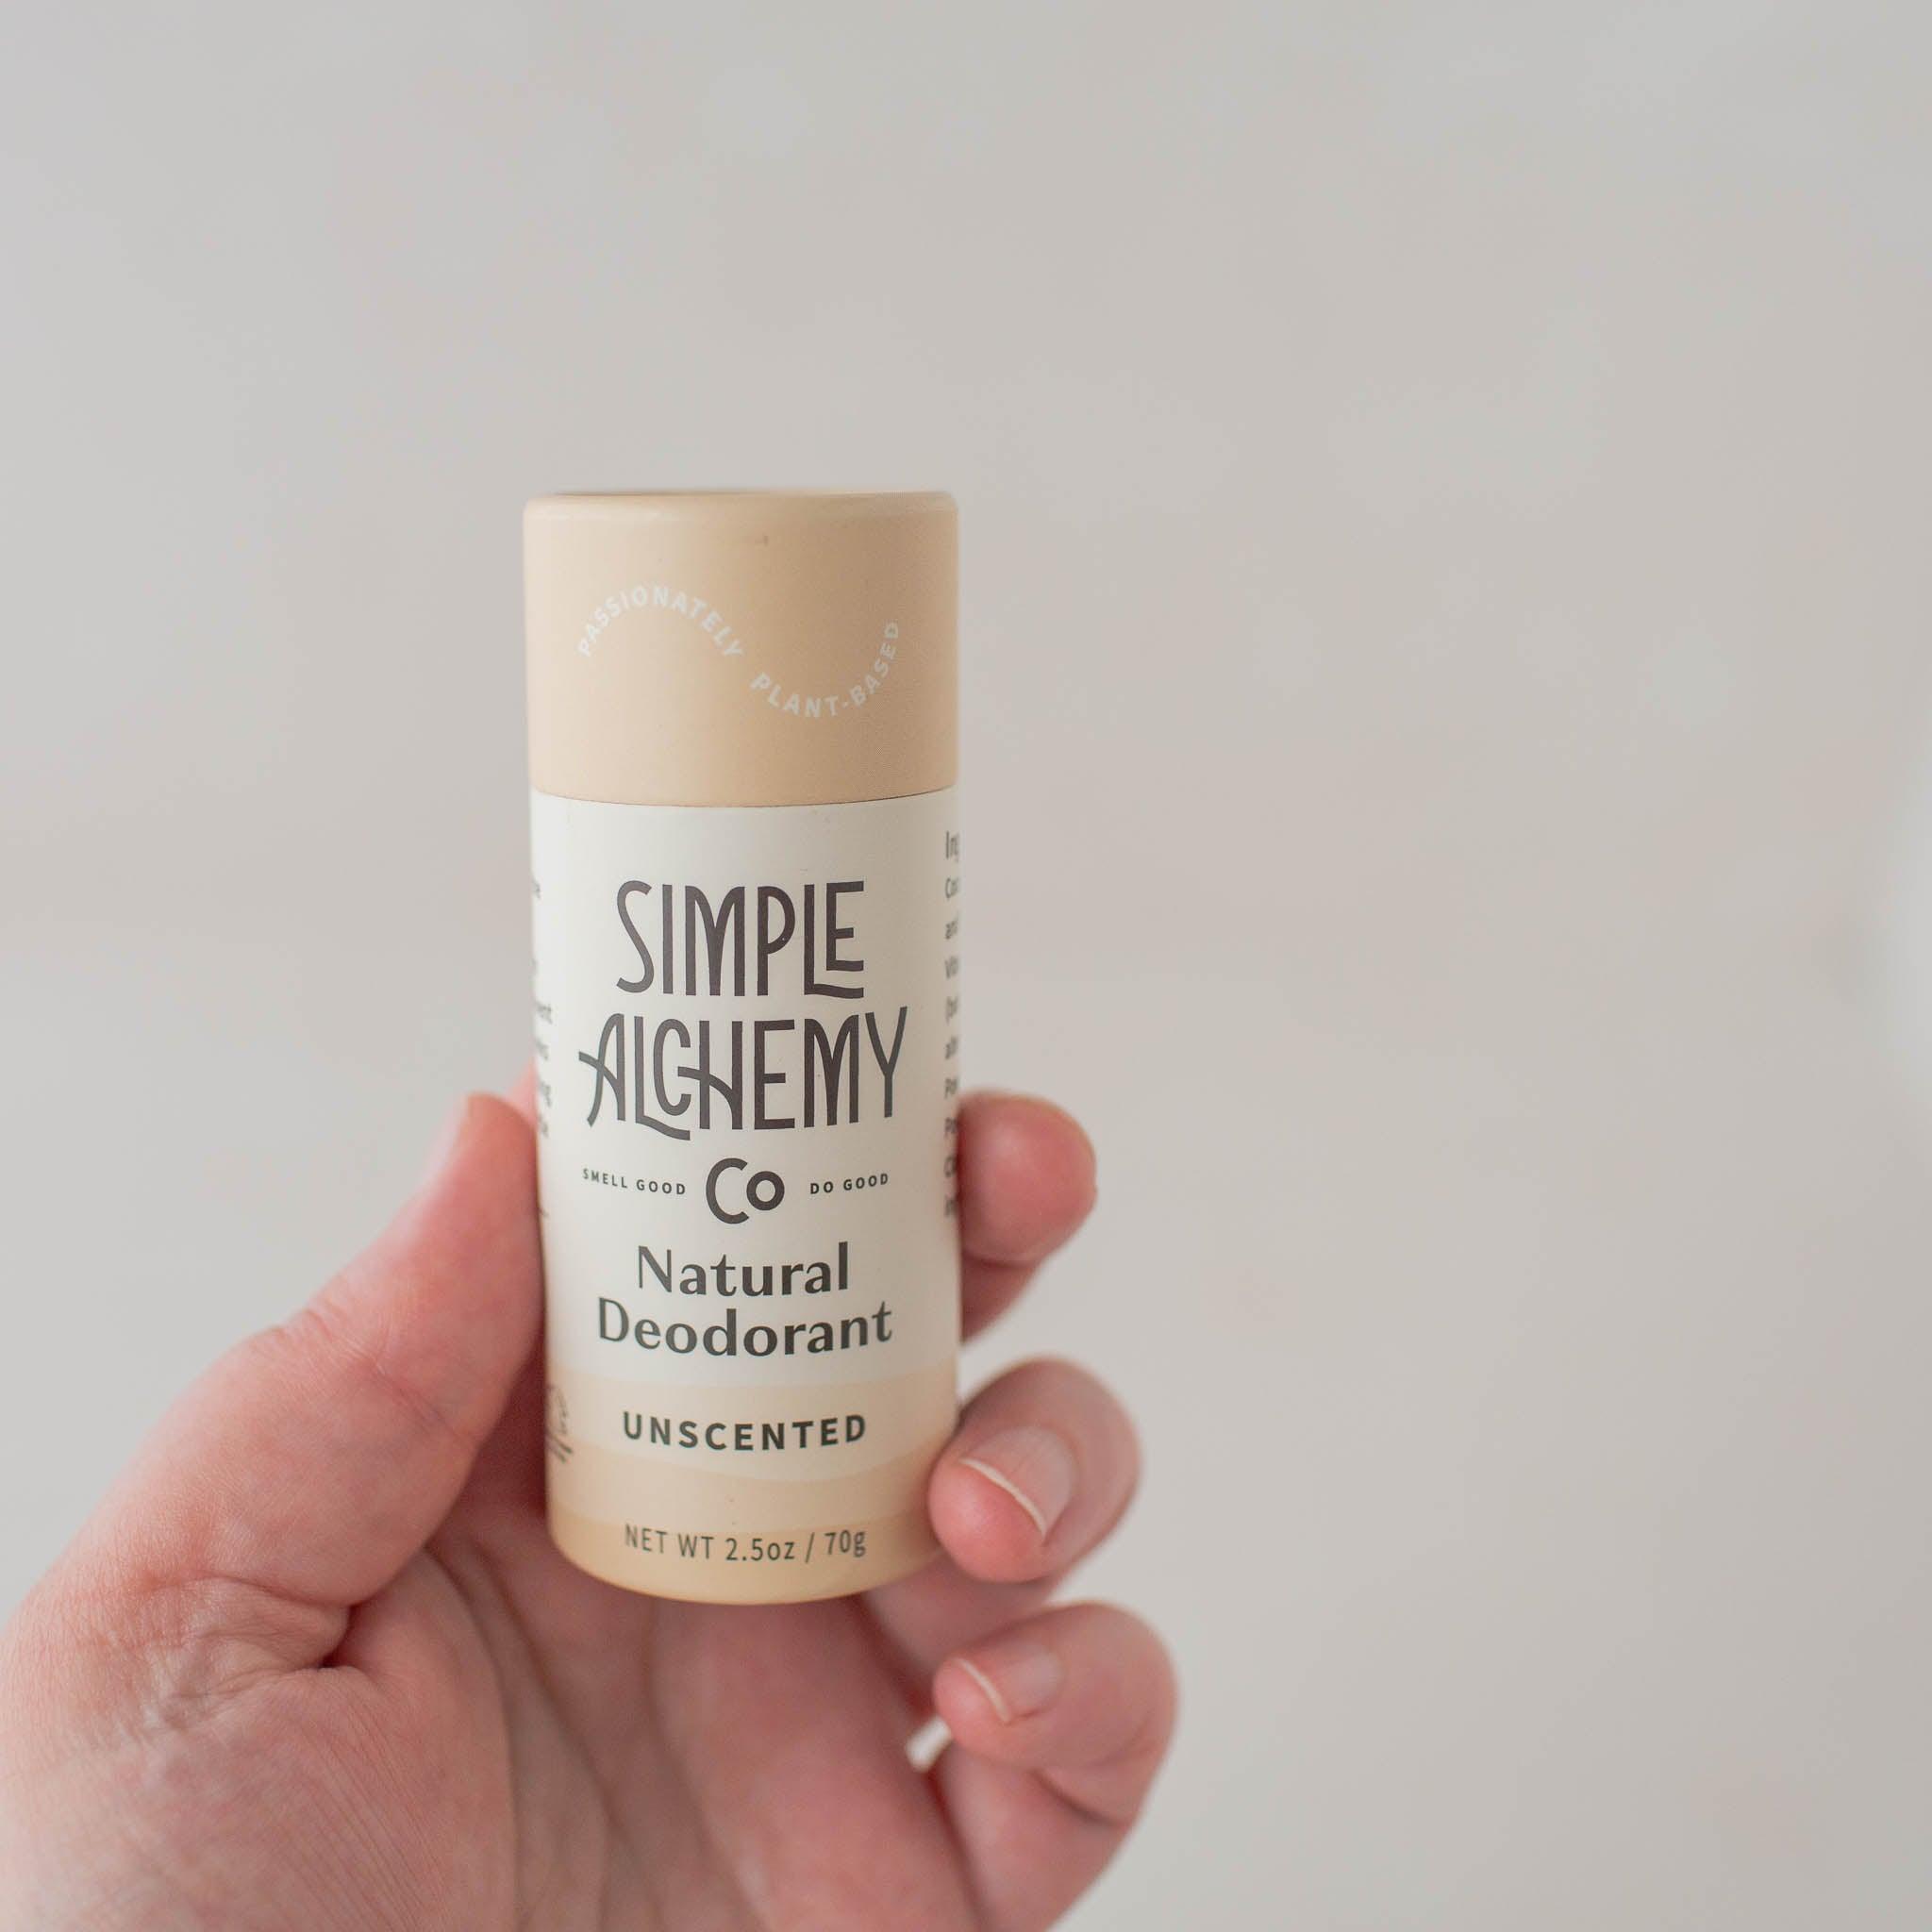 Hand holding cream colored compostable paper push-up tube of Unscented Natural Deodorant.